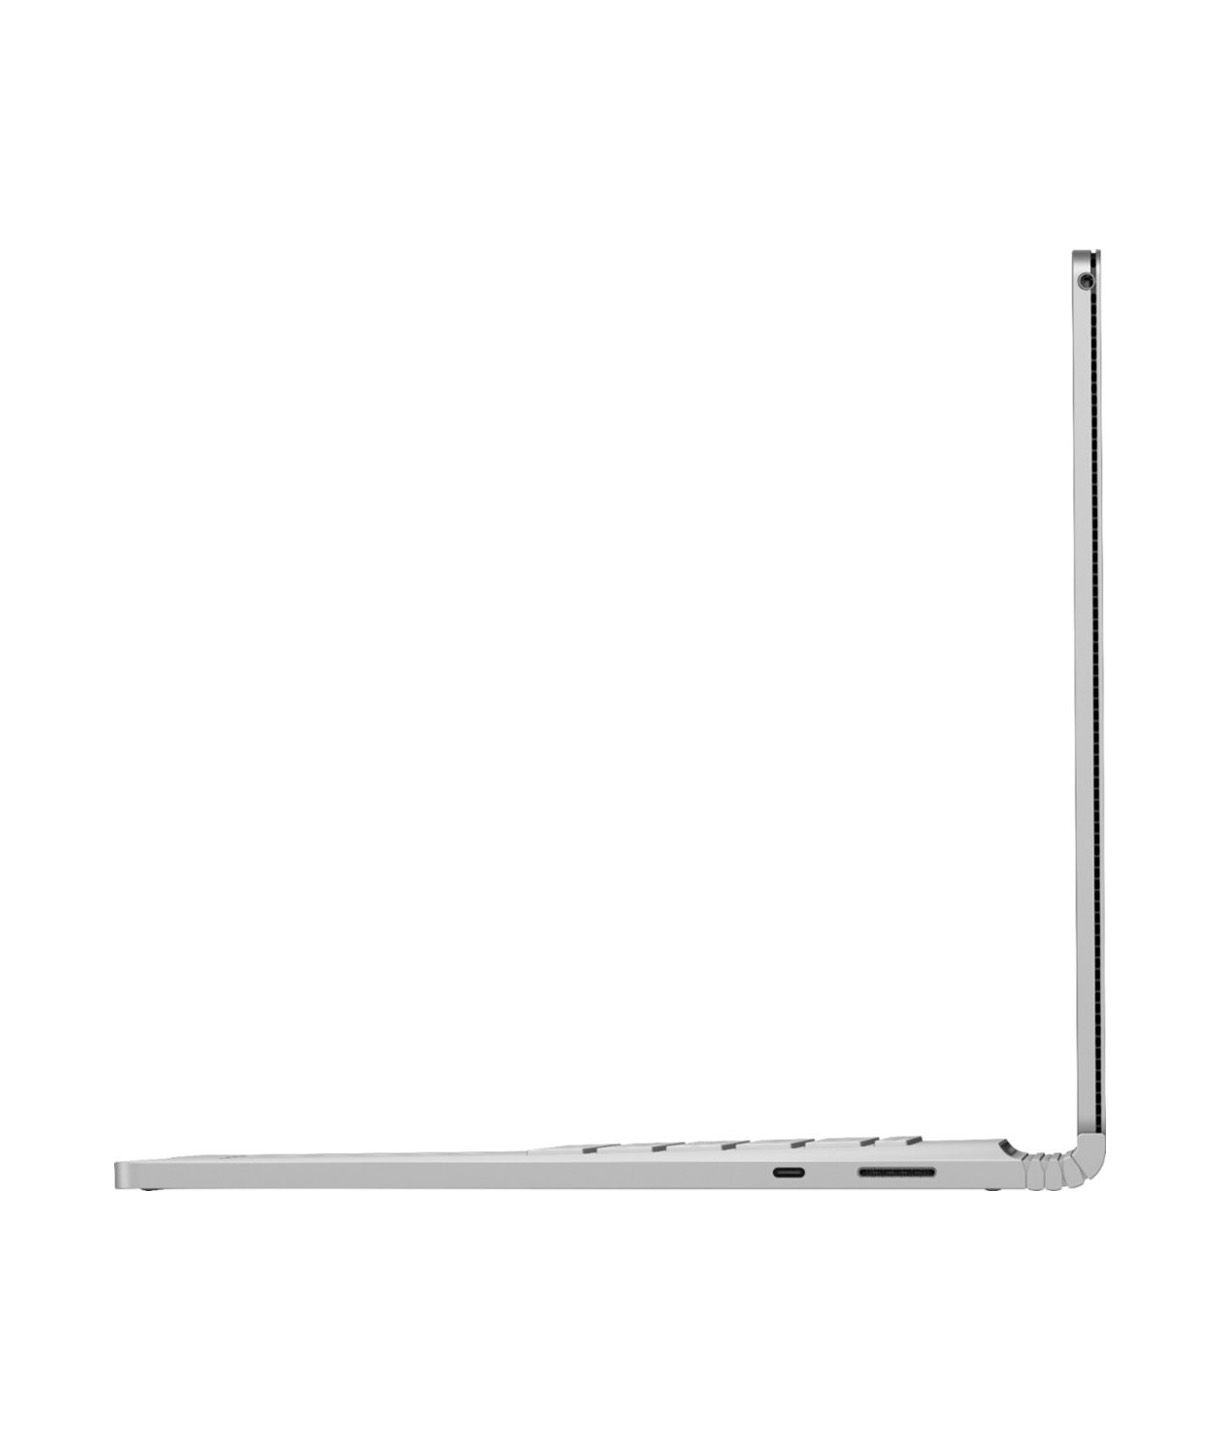 Surface Book 3 3